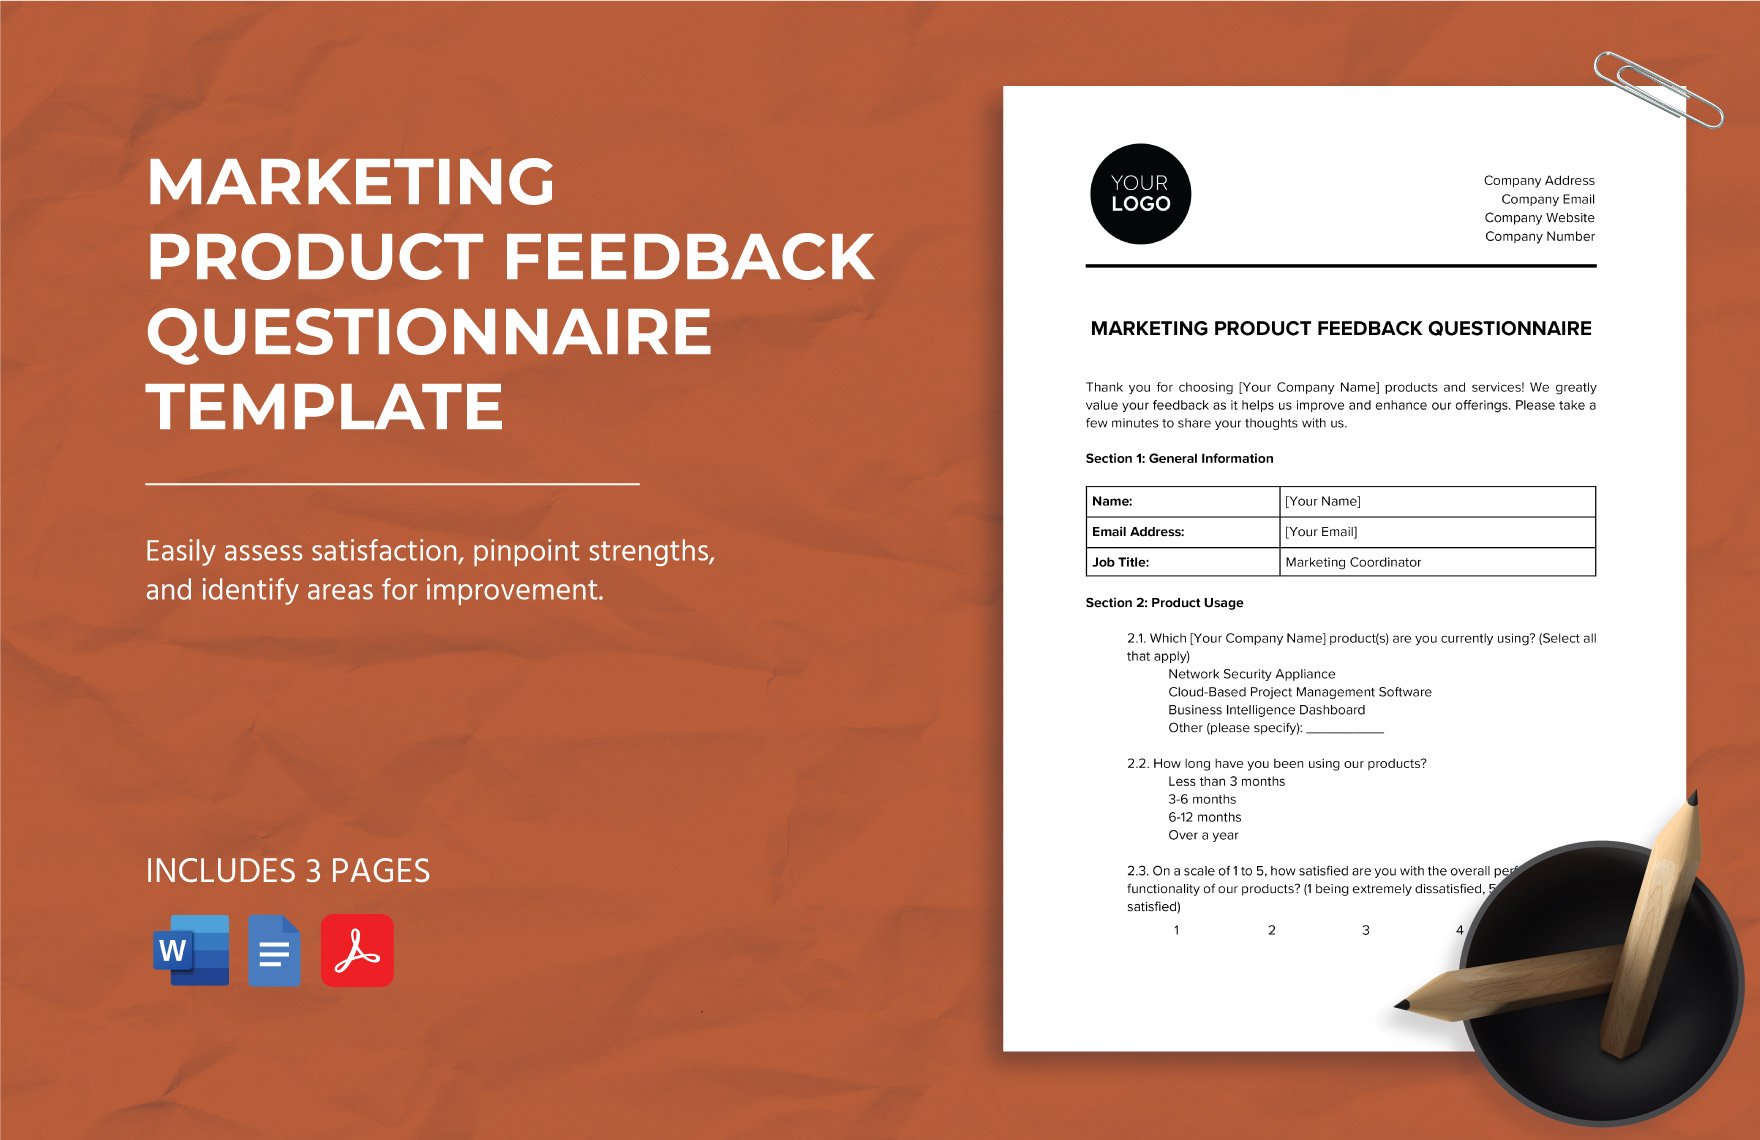 Marketing Product Feedback Questionnaire Template in Word, Google Docs, PDF